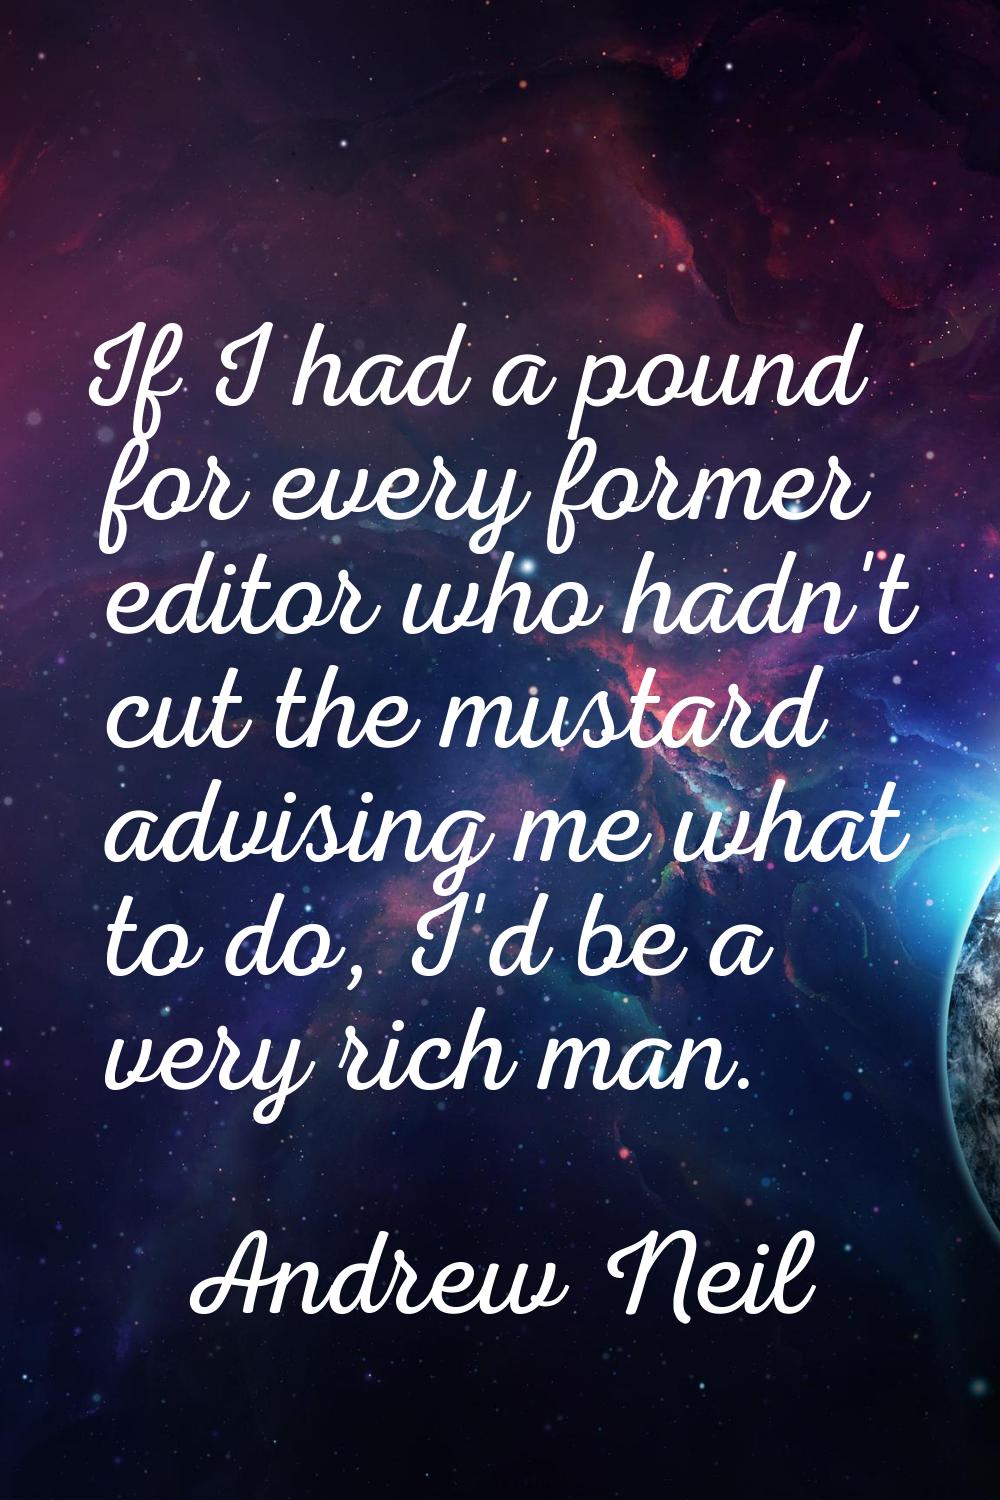 If I had a pound for every former editor who hadn't cut the mustard advising me what to do, I'd be 